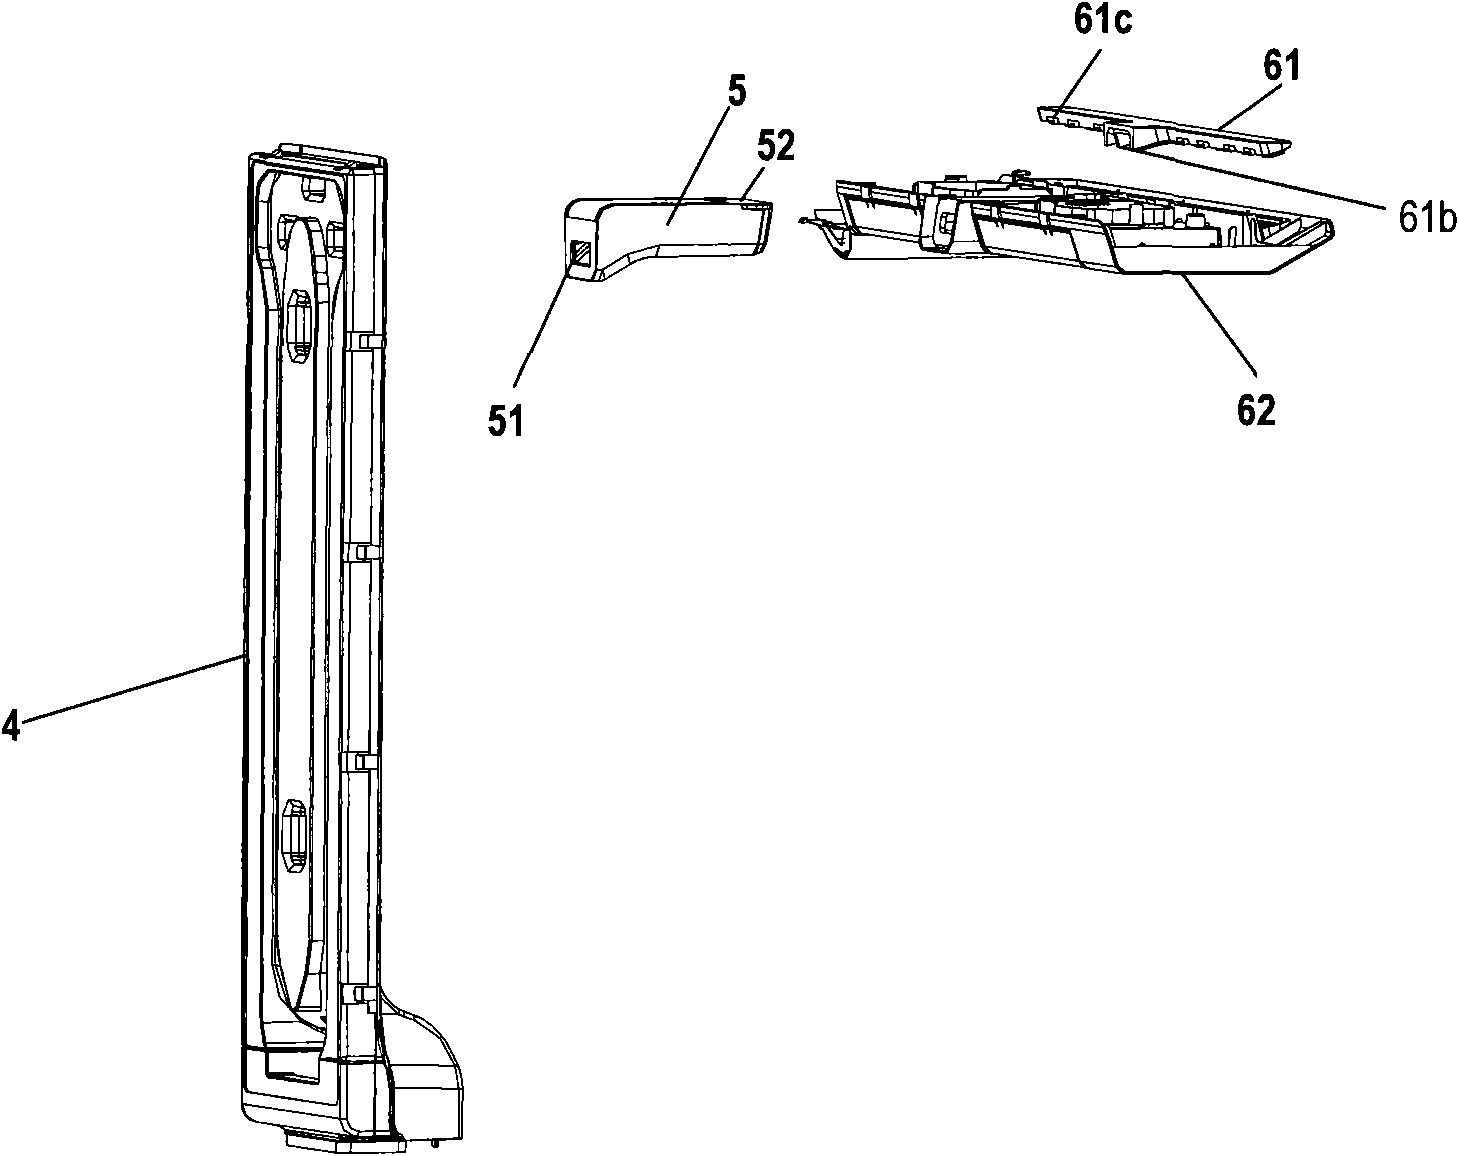 Air outlet system of air-cooled type refrigerator